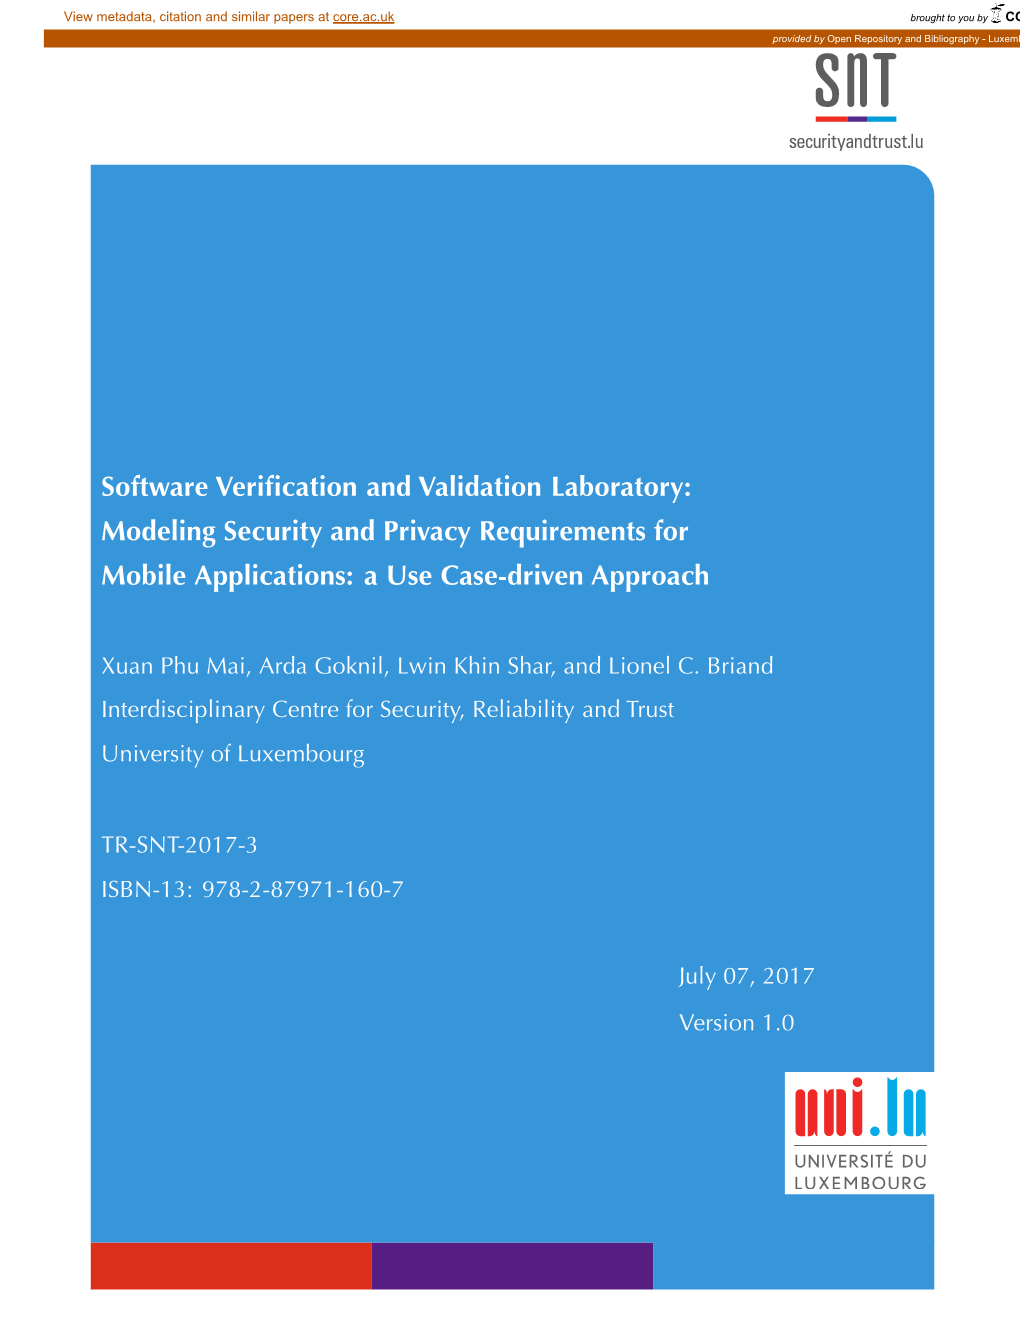 Software Verification and Validation Laboratory: Modeling Security And